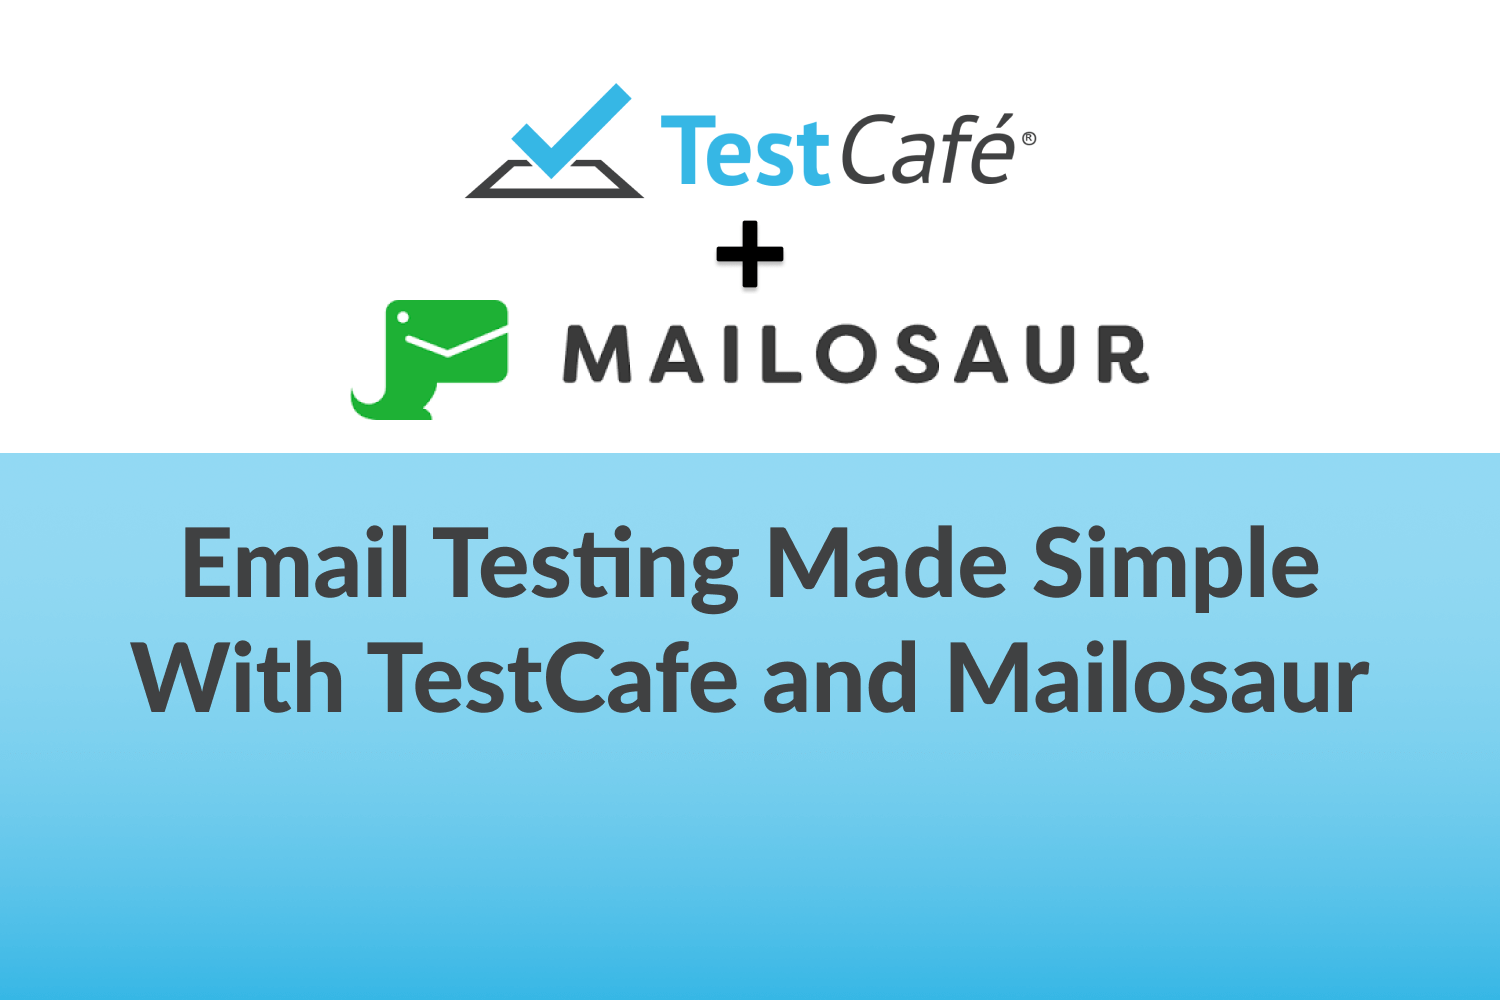 Email Testing Made Simple With TestCafe and Mailosaur